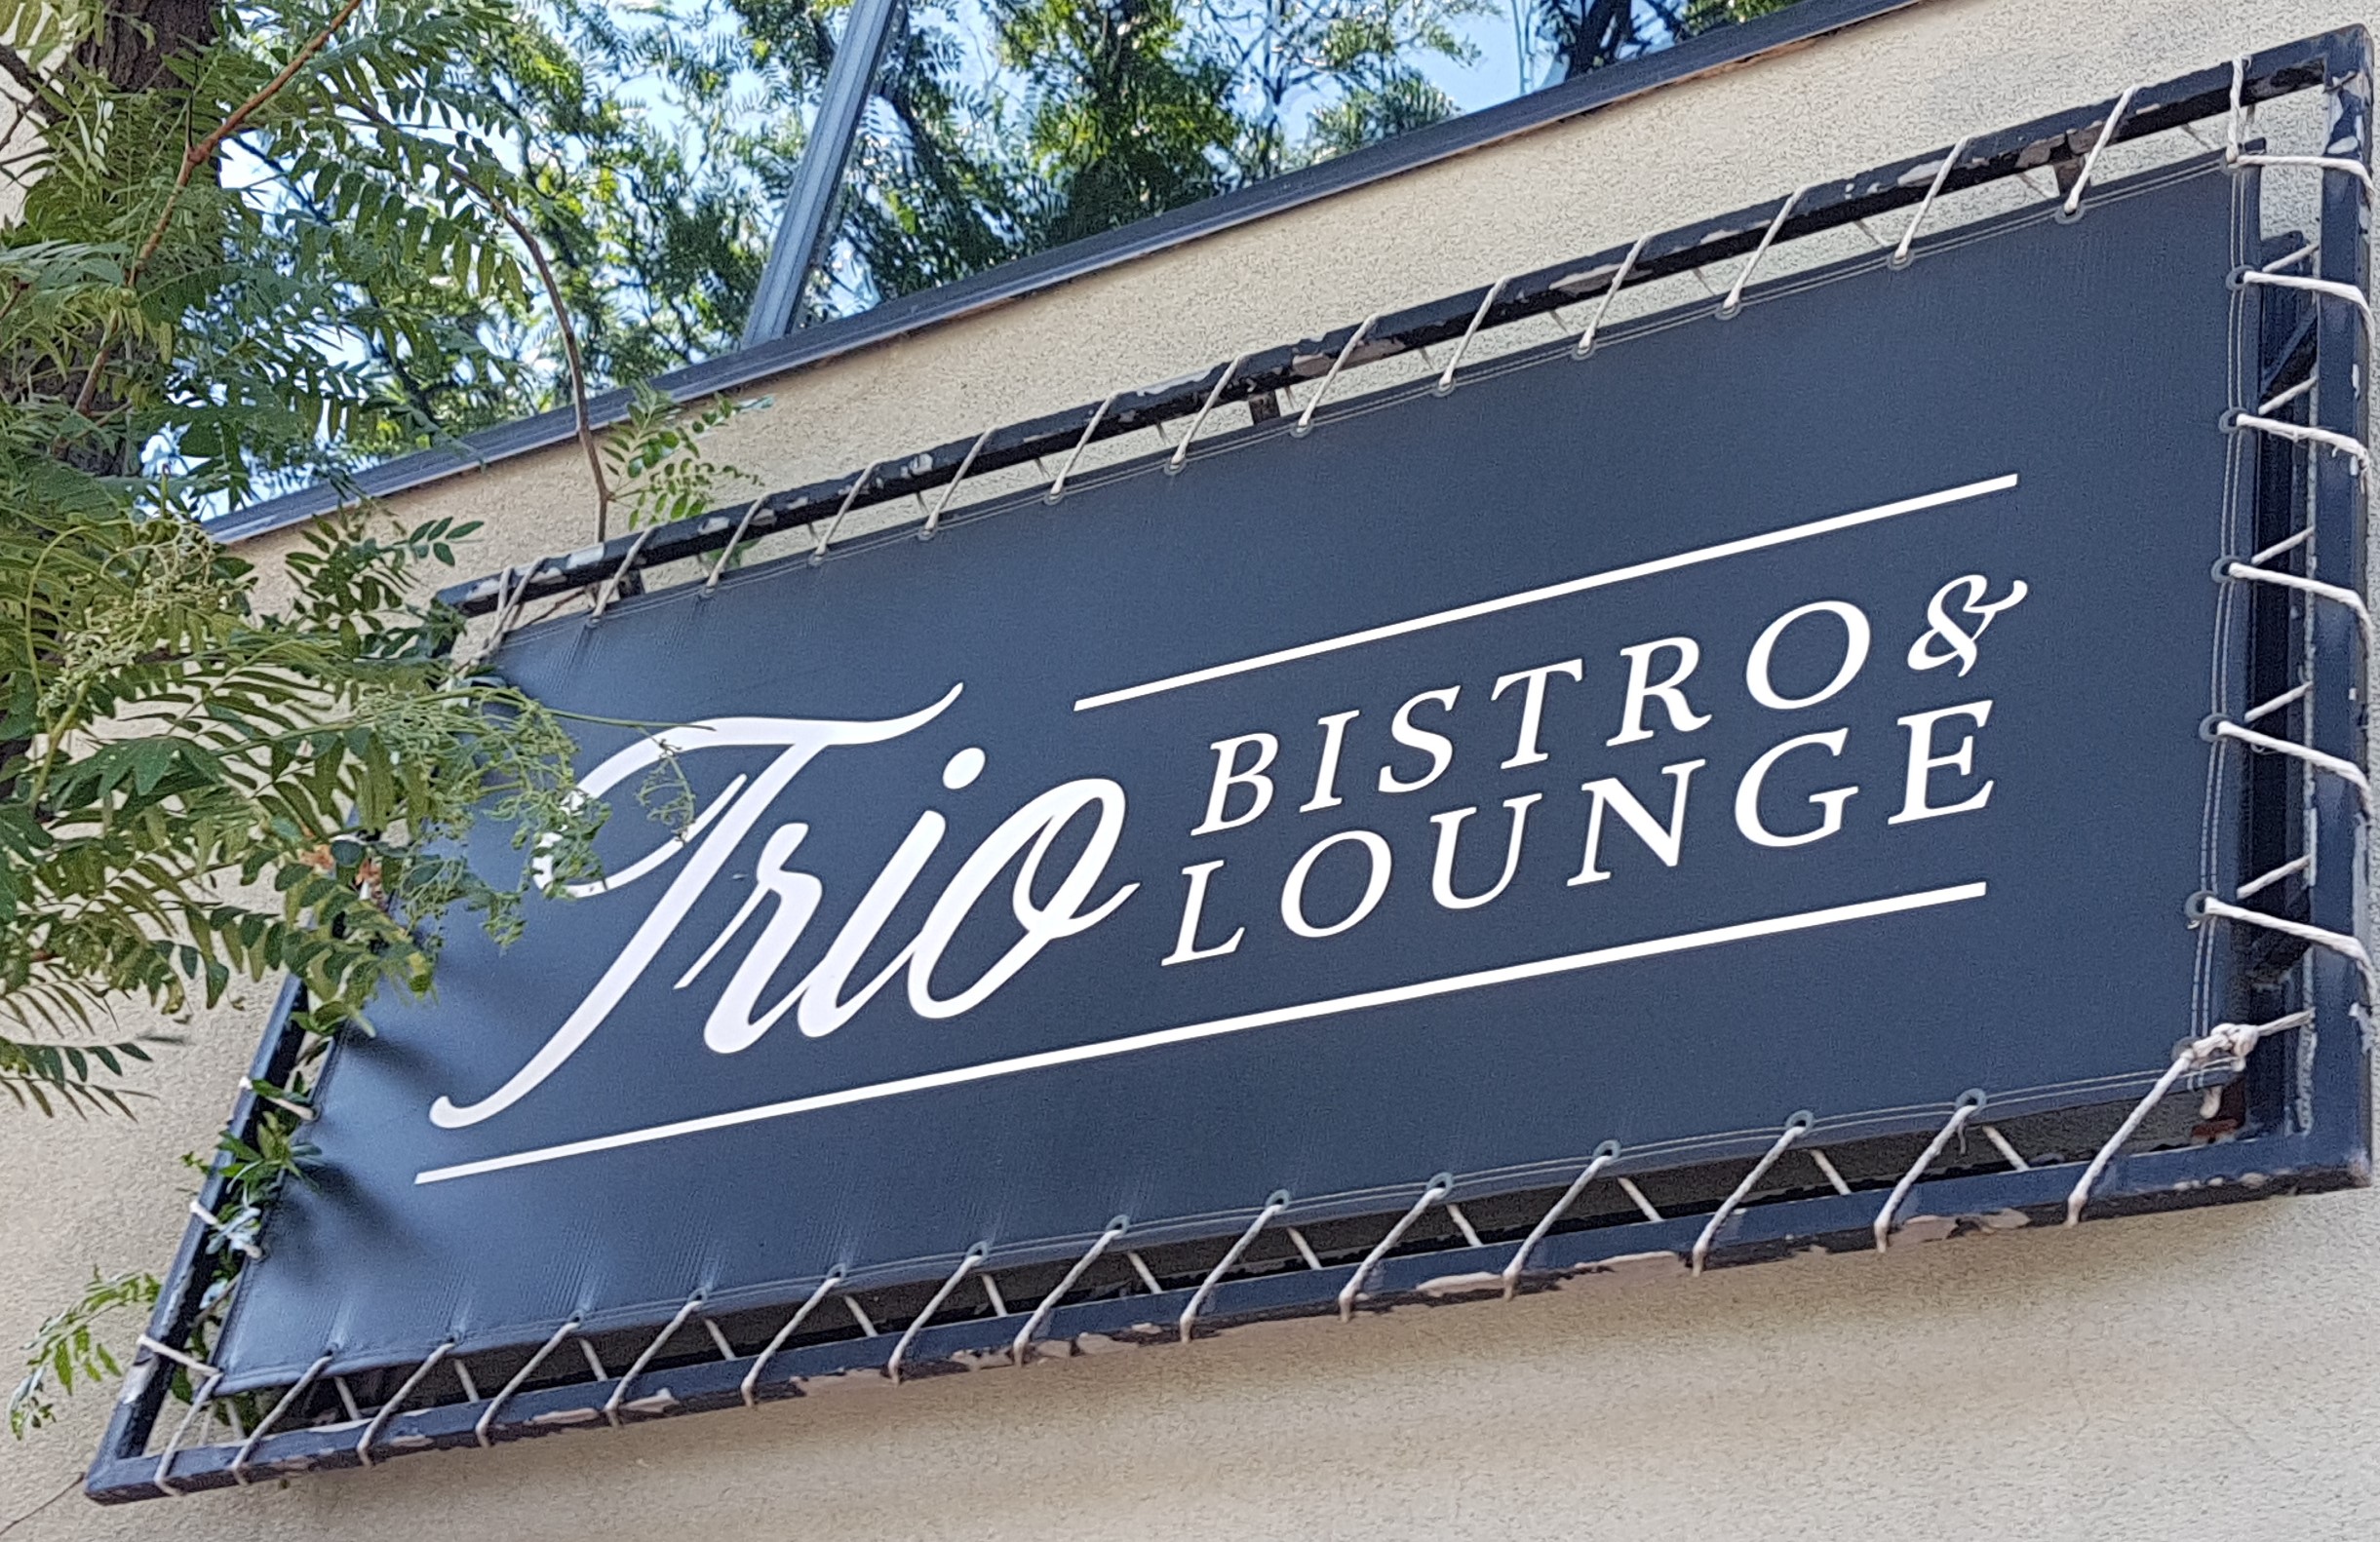 A black sigh on a white building with the business name Trio Bistro & Lounge